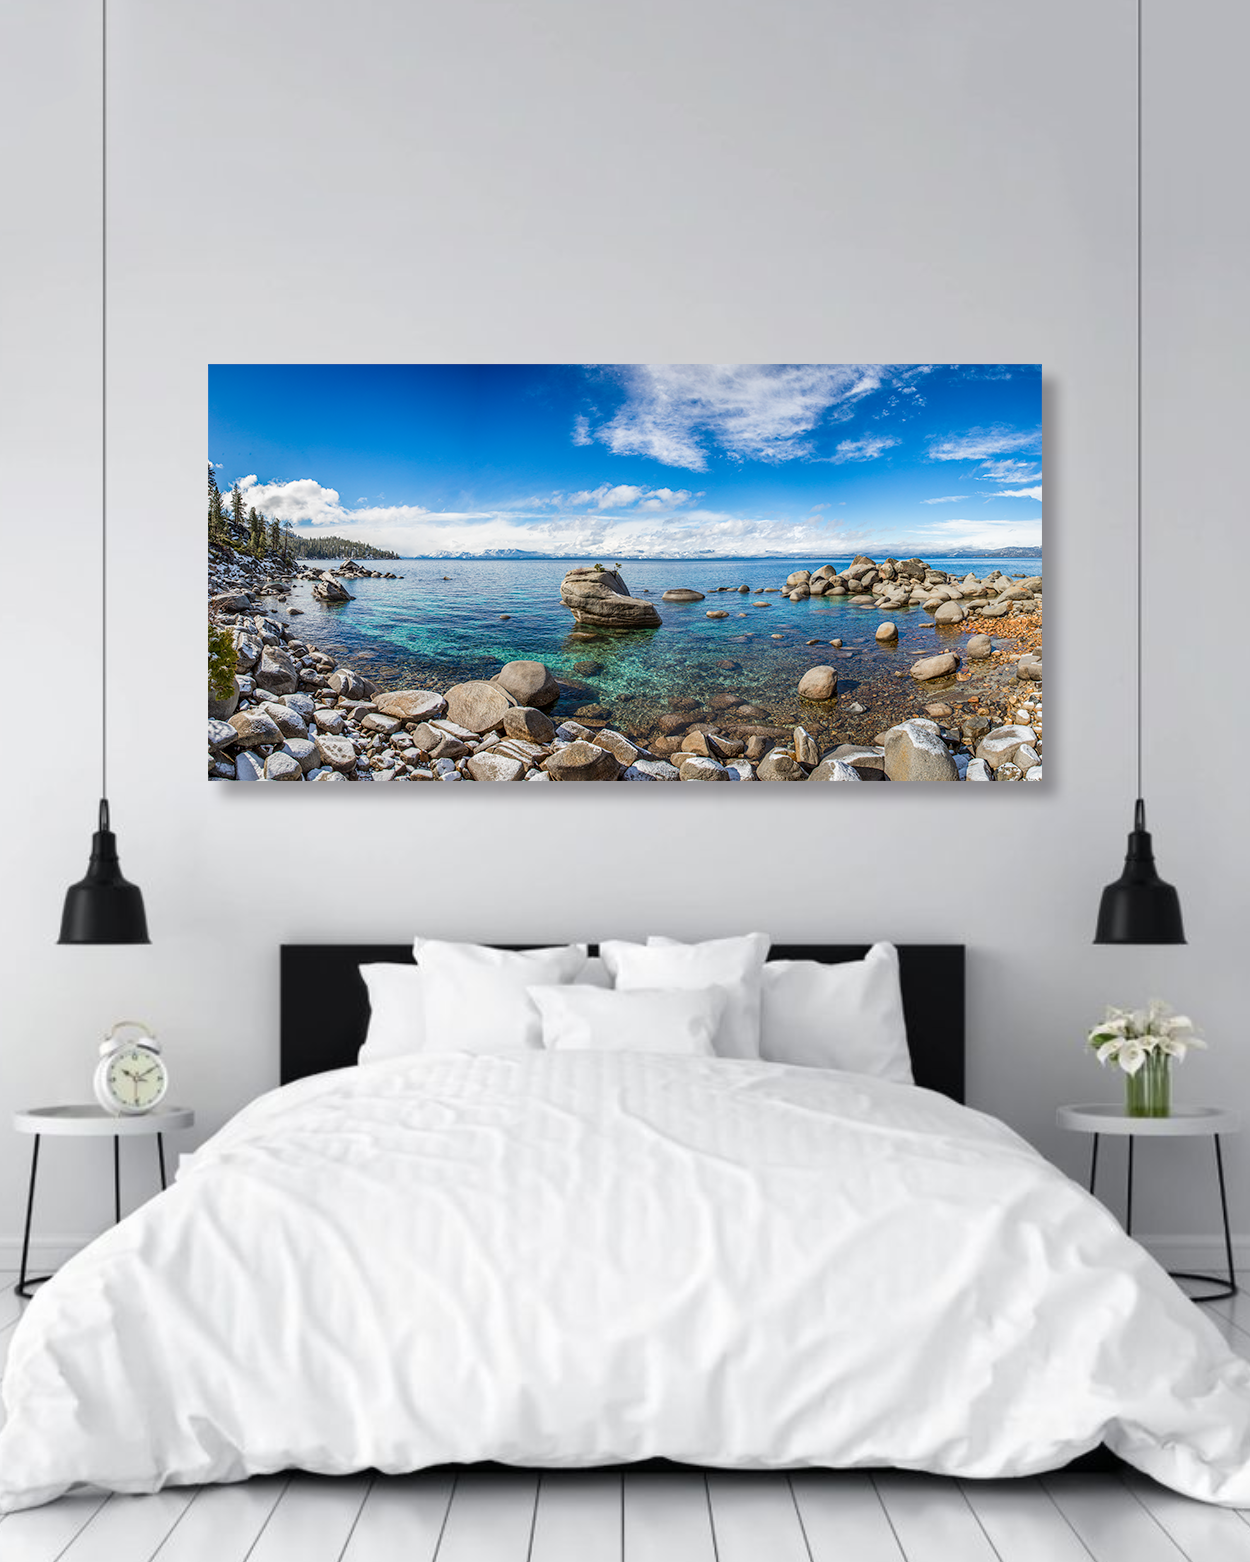 A photograph of Lake Tahoe hangs on the wall of a bedroom.